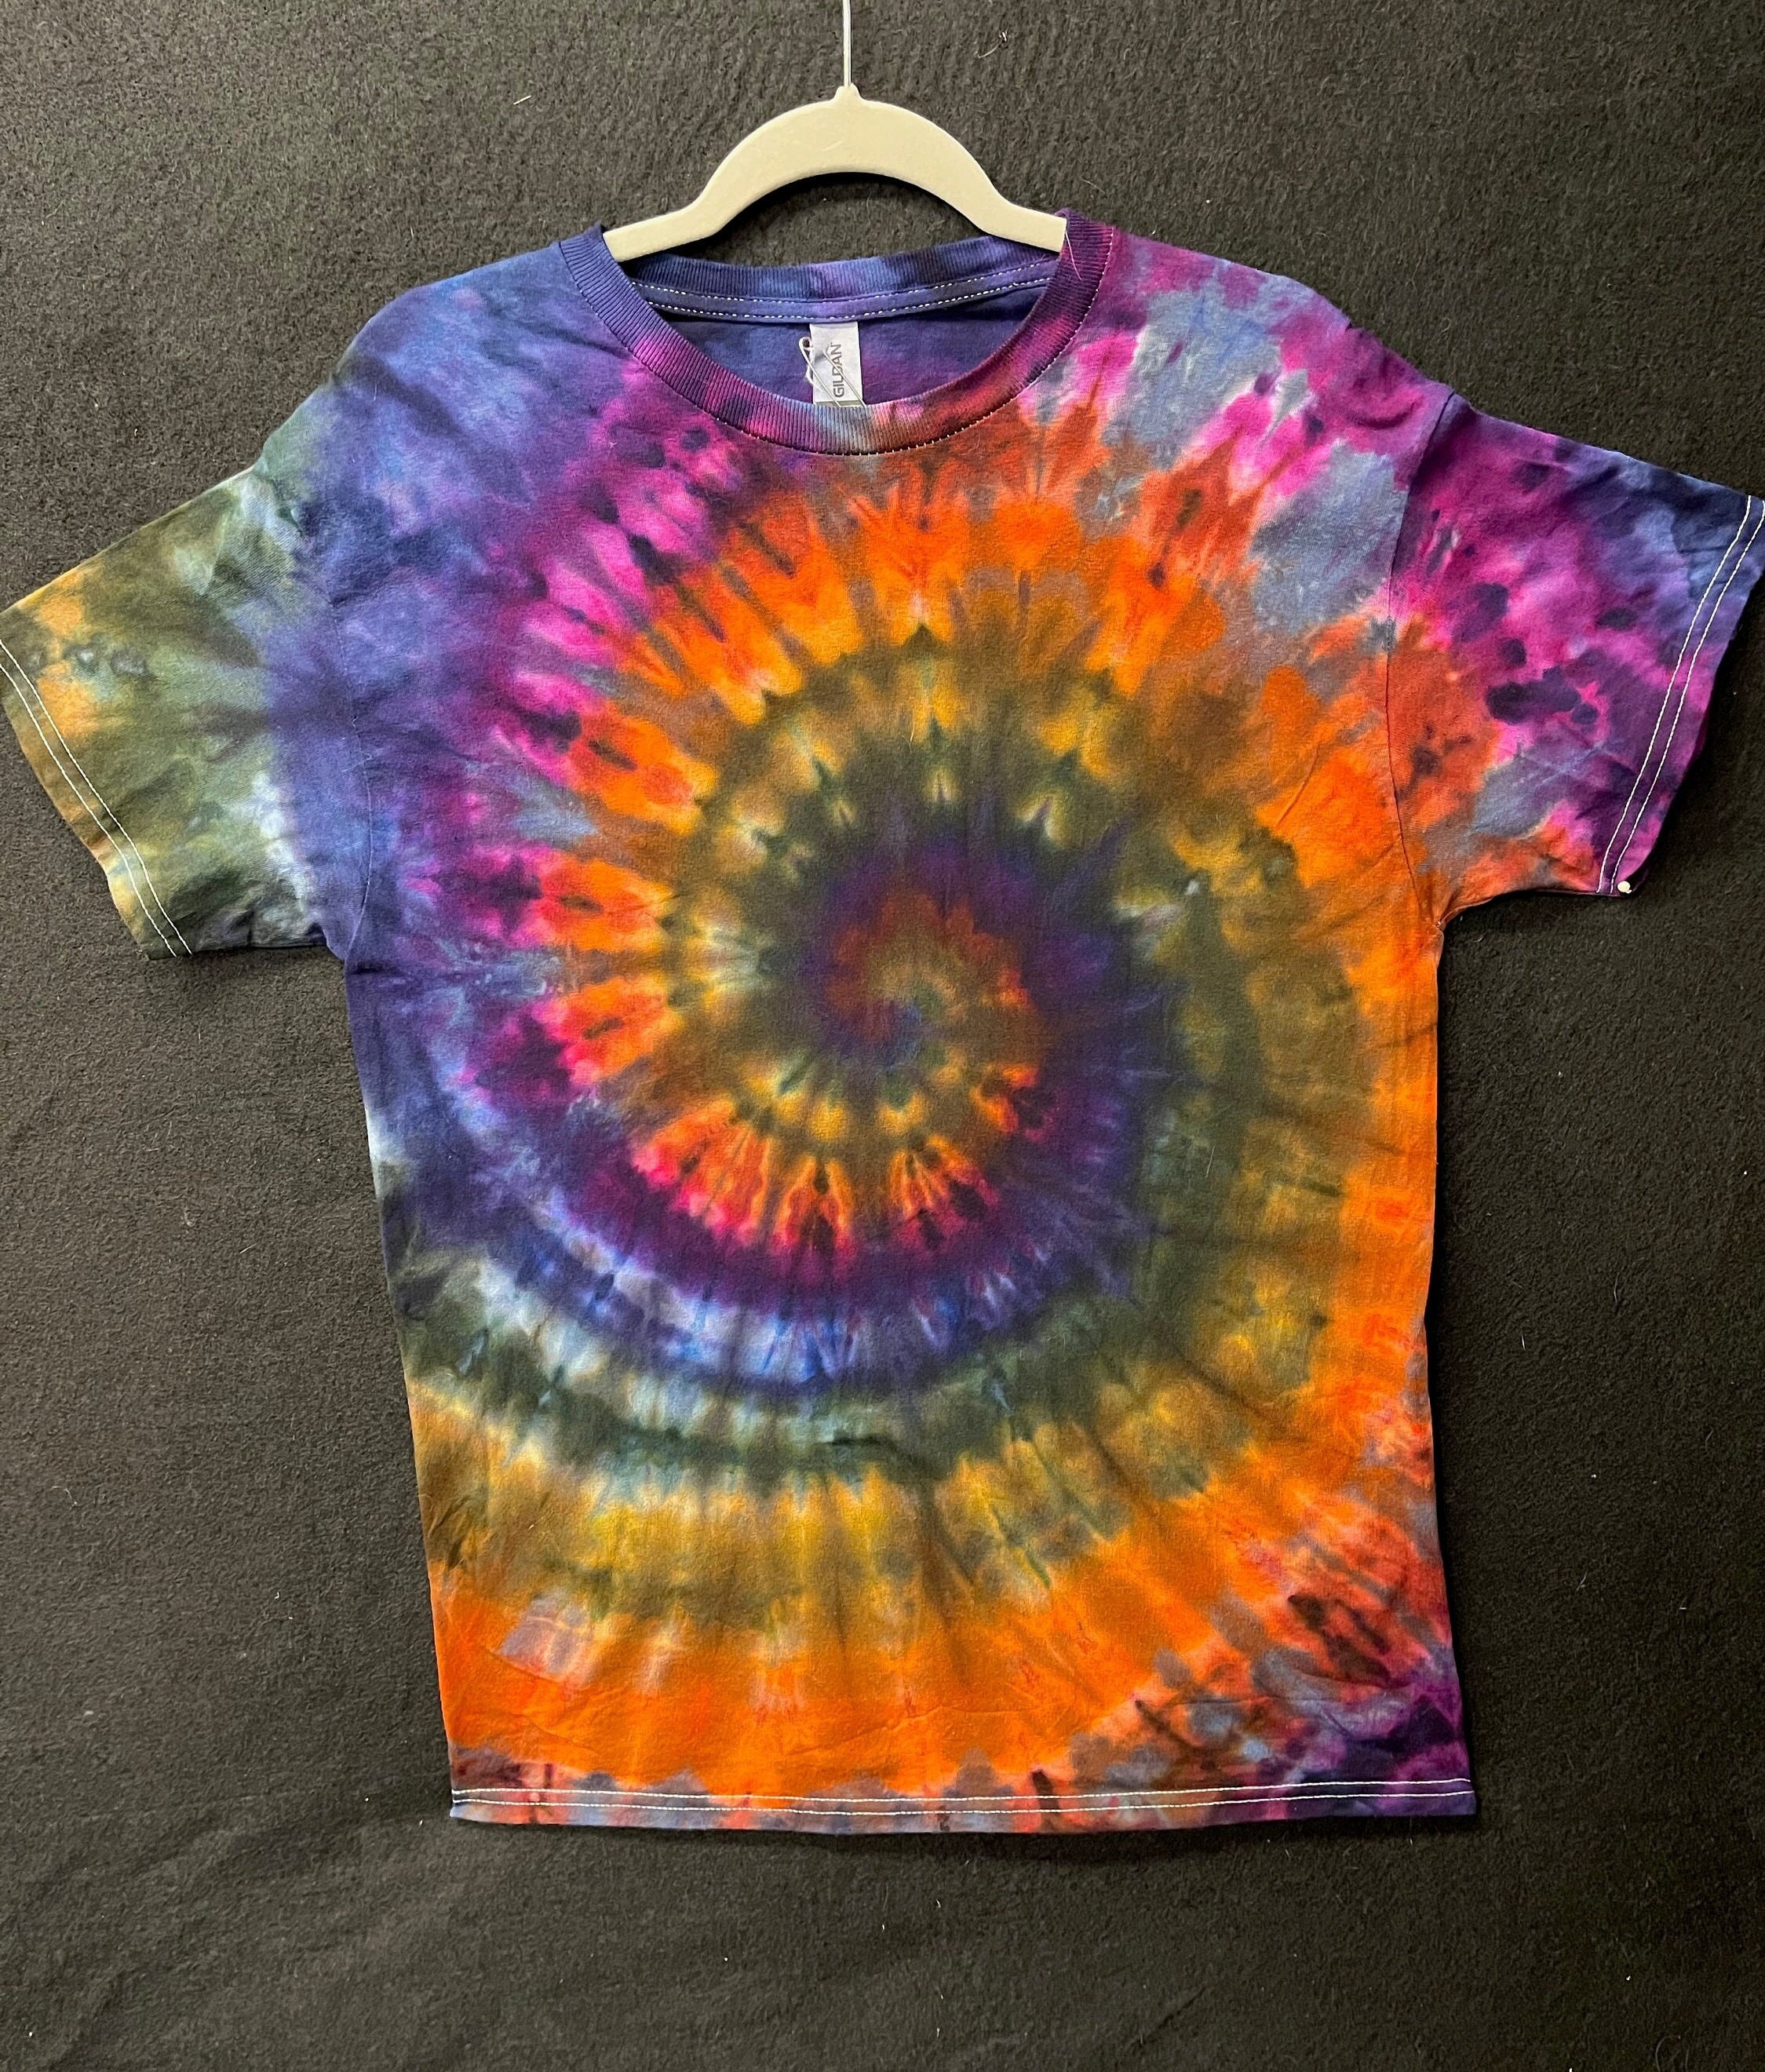 How To Tie Dye: Double Spiral (Liquid Dye) Extended Explanation